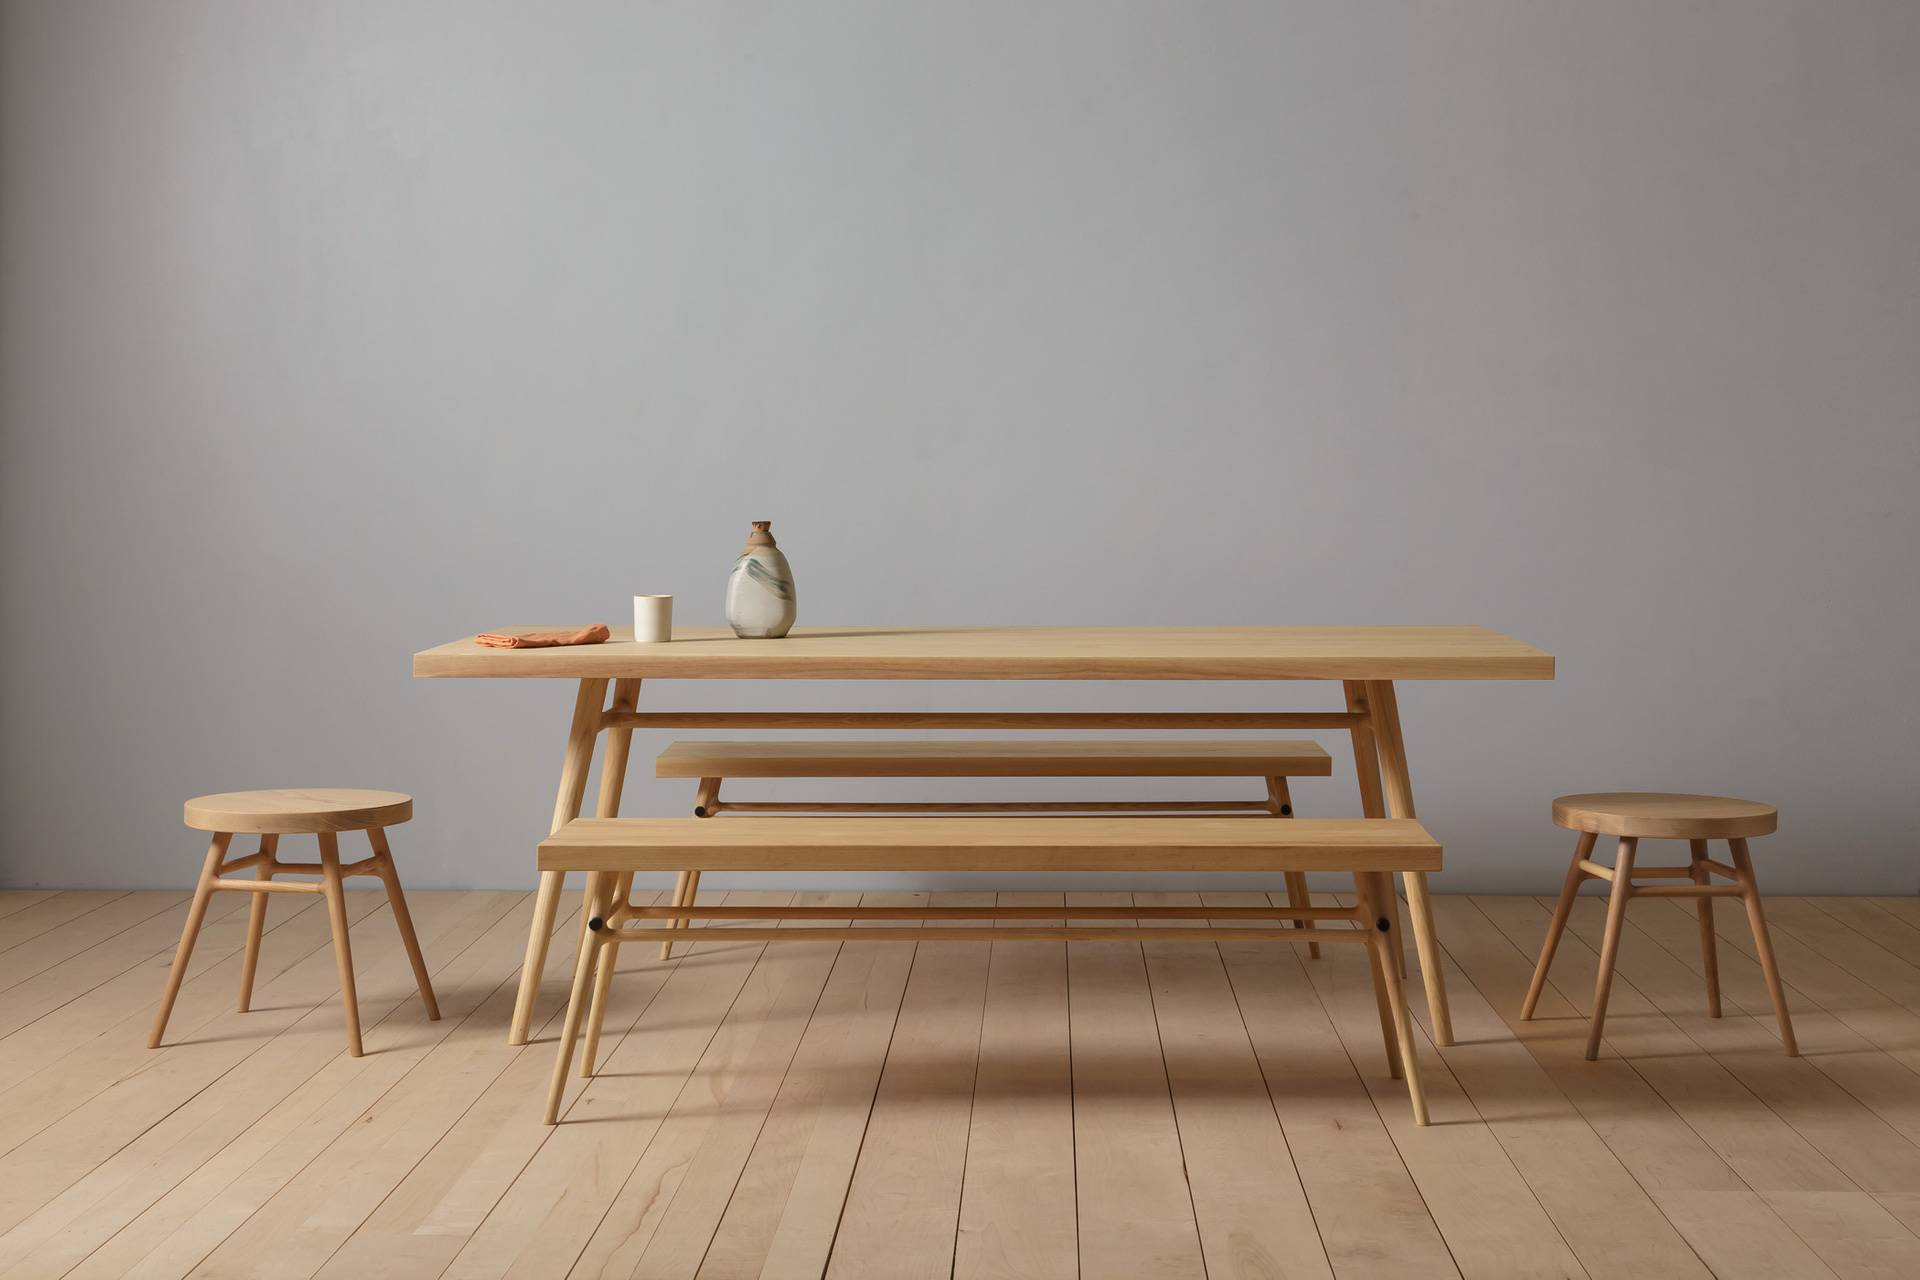 Wooden Spindle Benches, Wooden Bench Kitchen Table